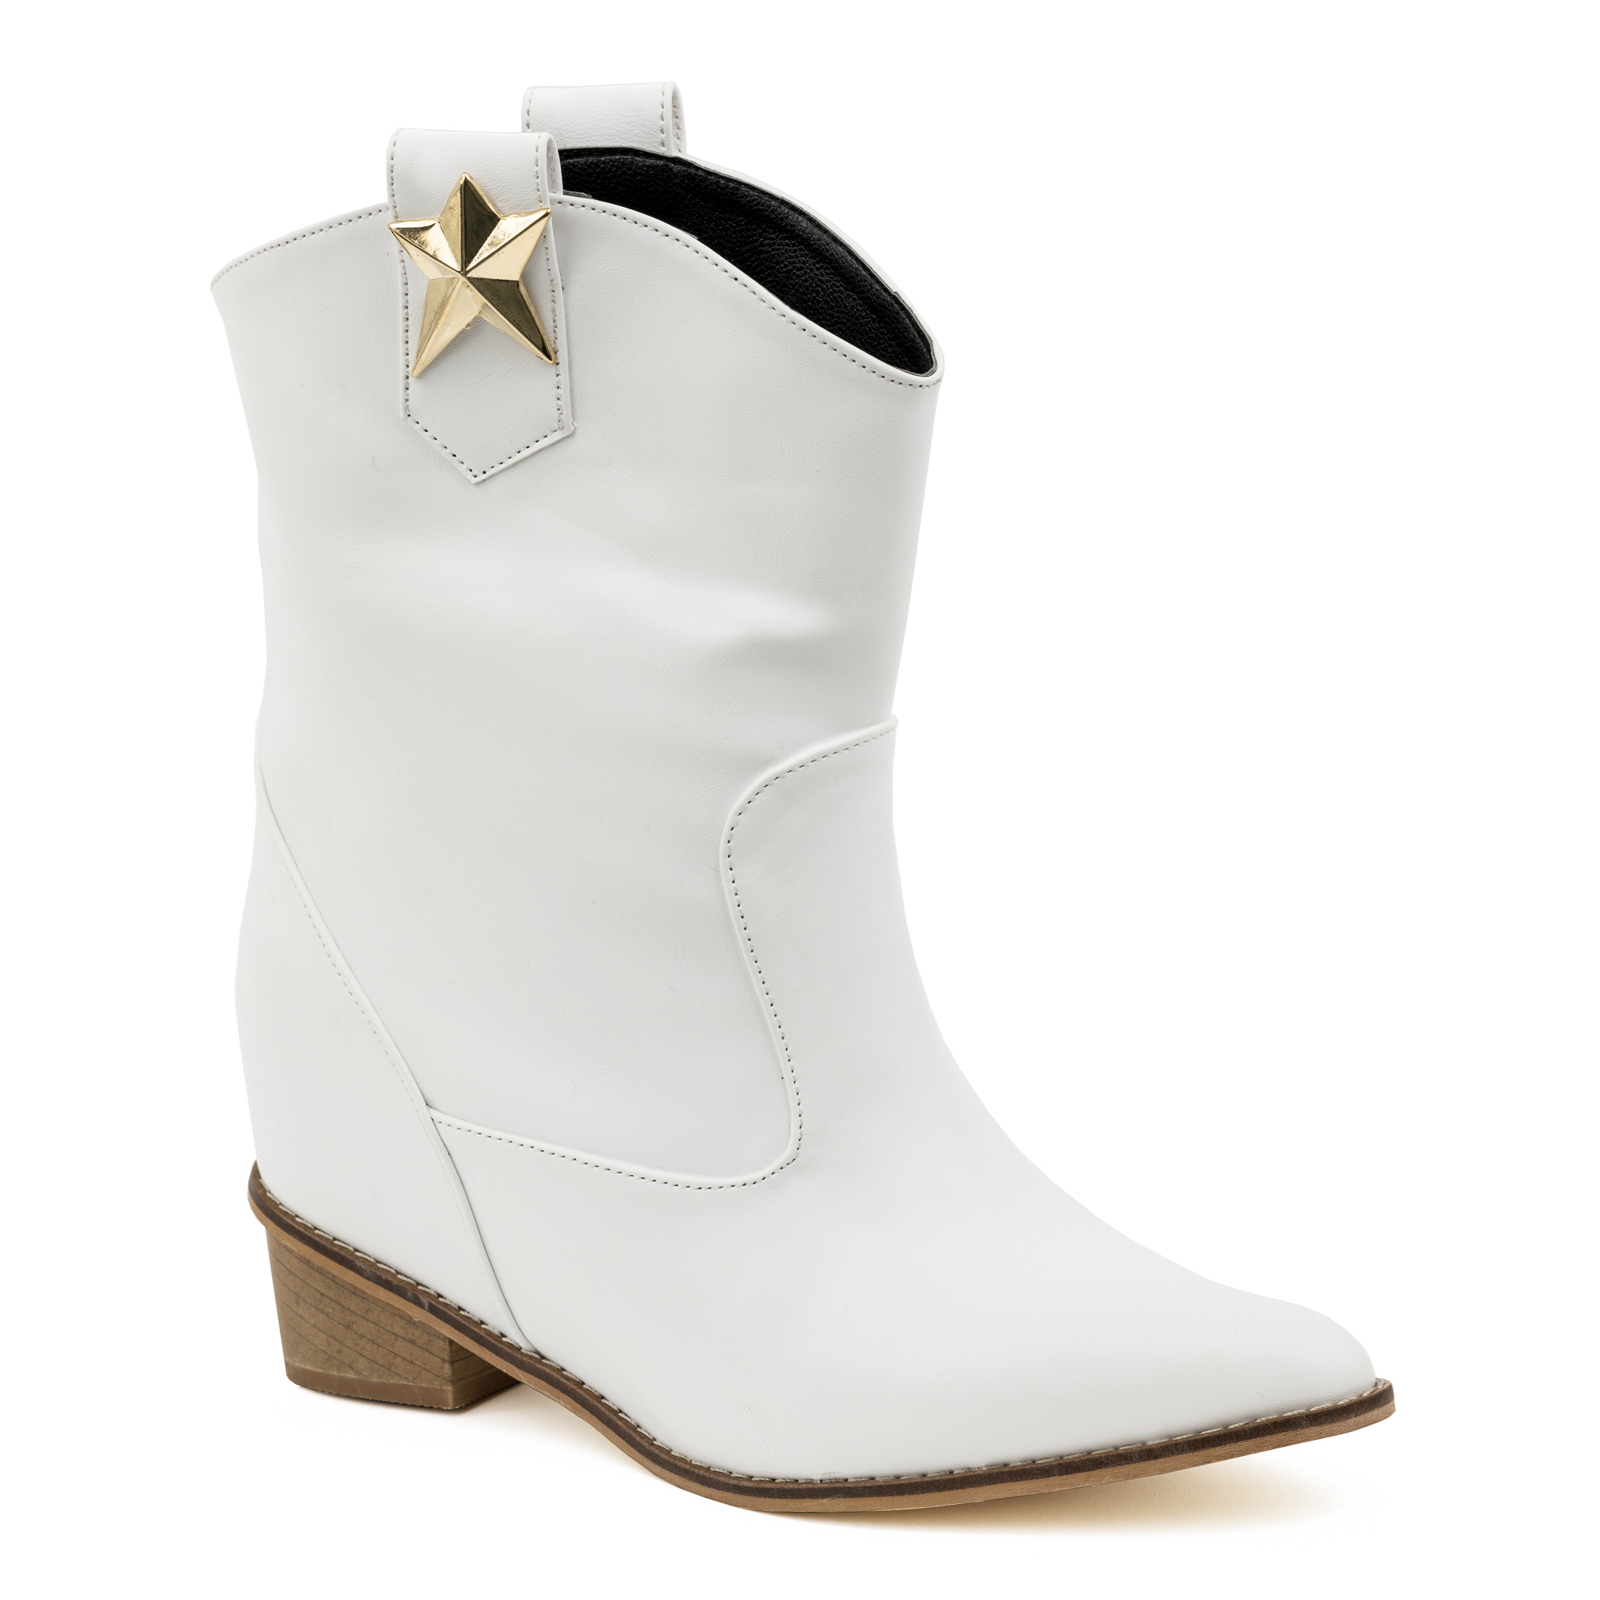 SPIKE COWGIRL BOOTS WITH HIDDEN HEEL - WHITE